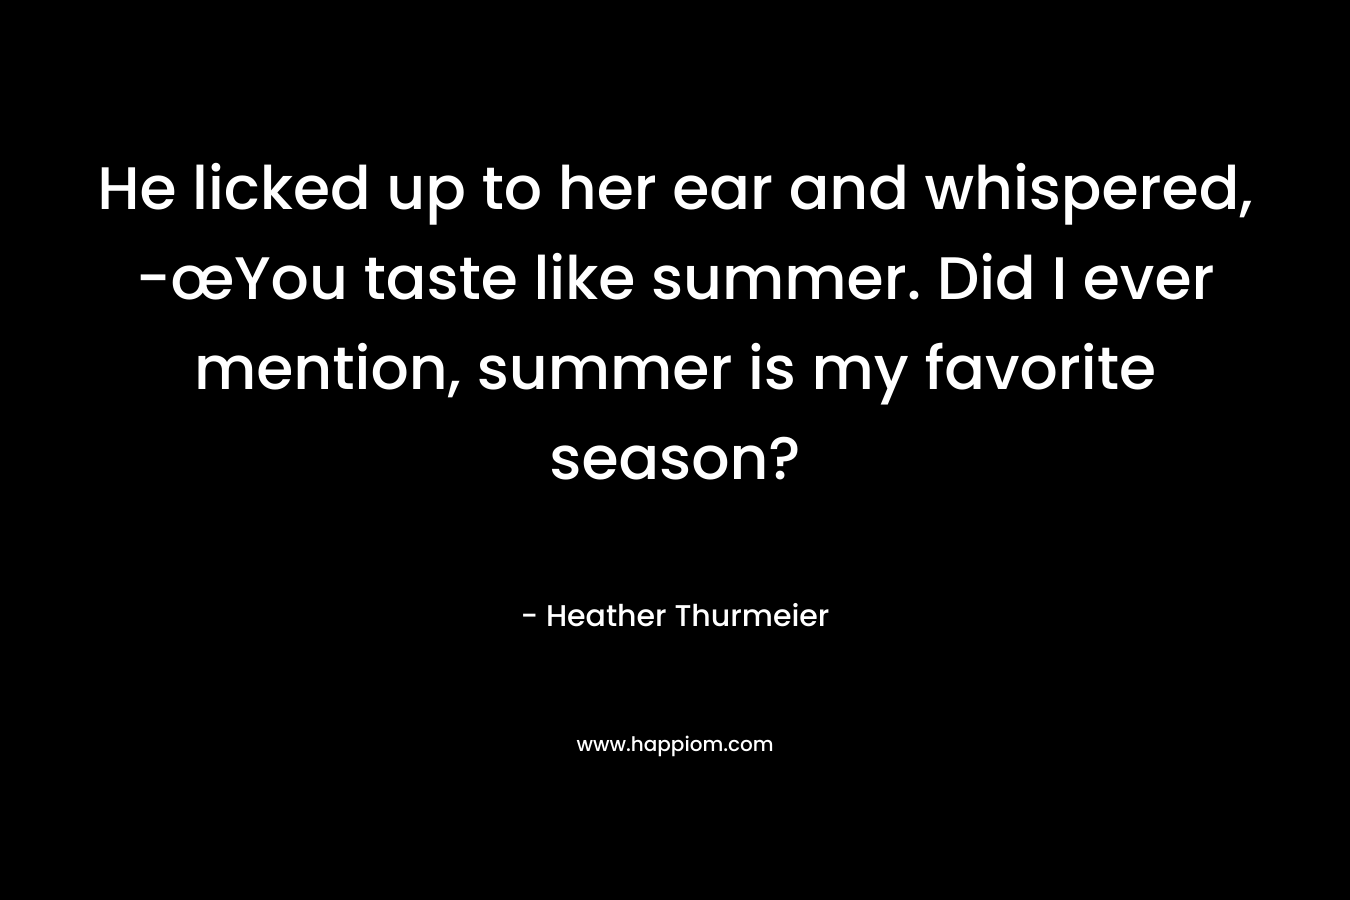 He licked up to her ear and whispered, -œYou taste like summer. Did I ever mention, summer is my favorite season? – Heather Thurmeier